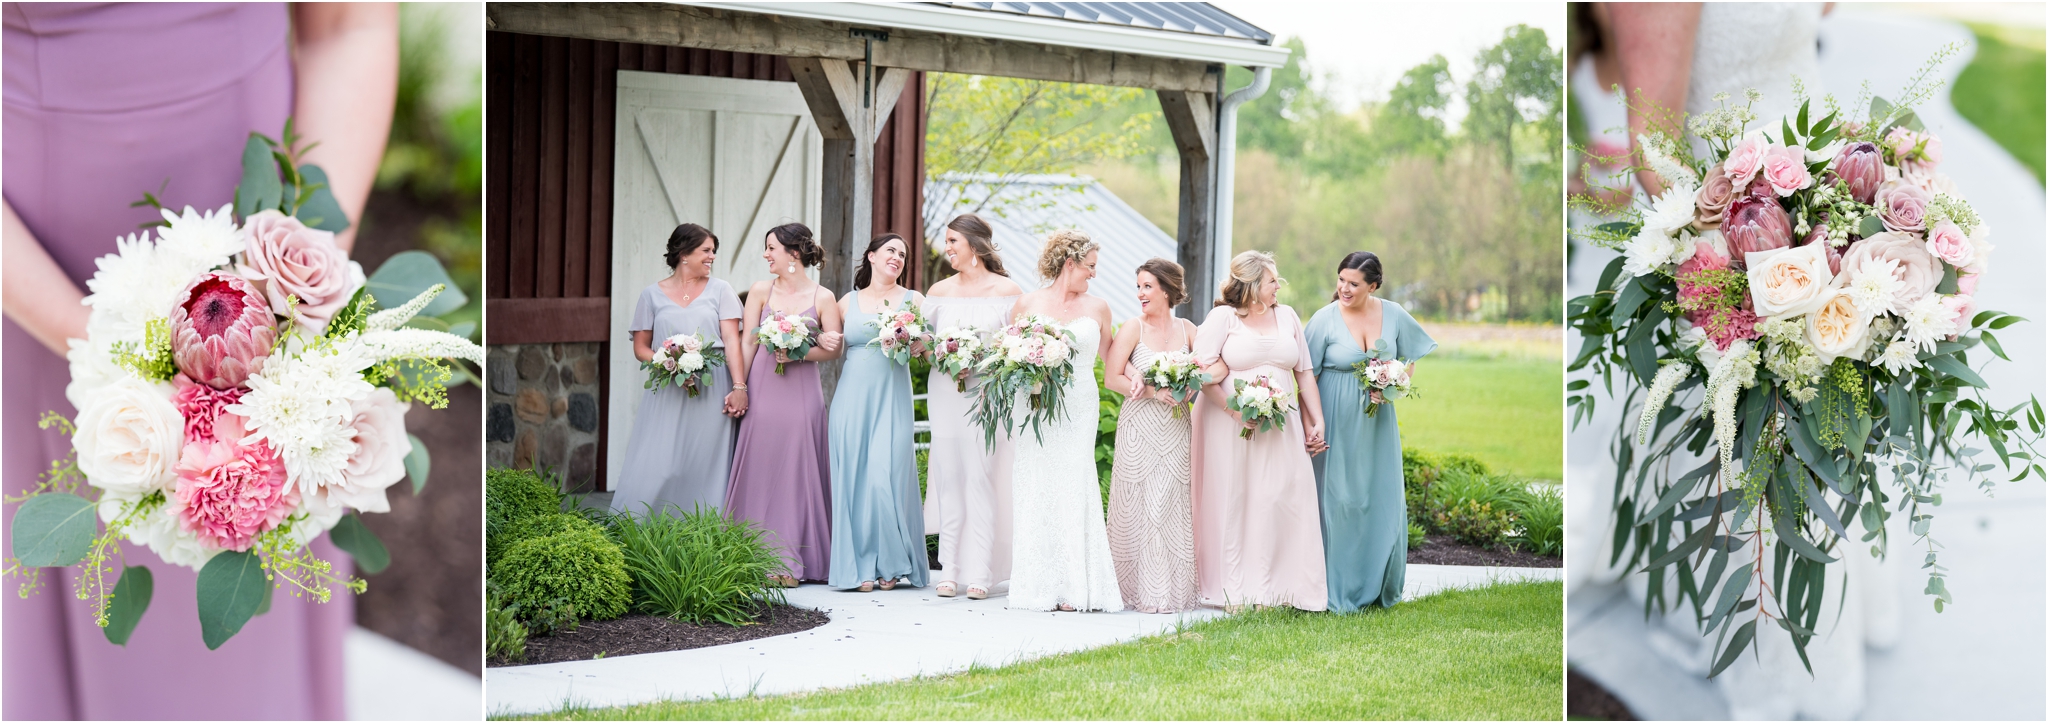 Lindley Farmstead at Chatham Hills | Sarah and Rachel Wedding Photographers | Westfield, Indiana wedding | peony bouquet with blush bridesmaid dresses